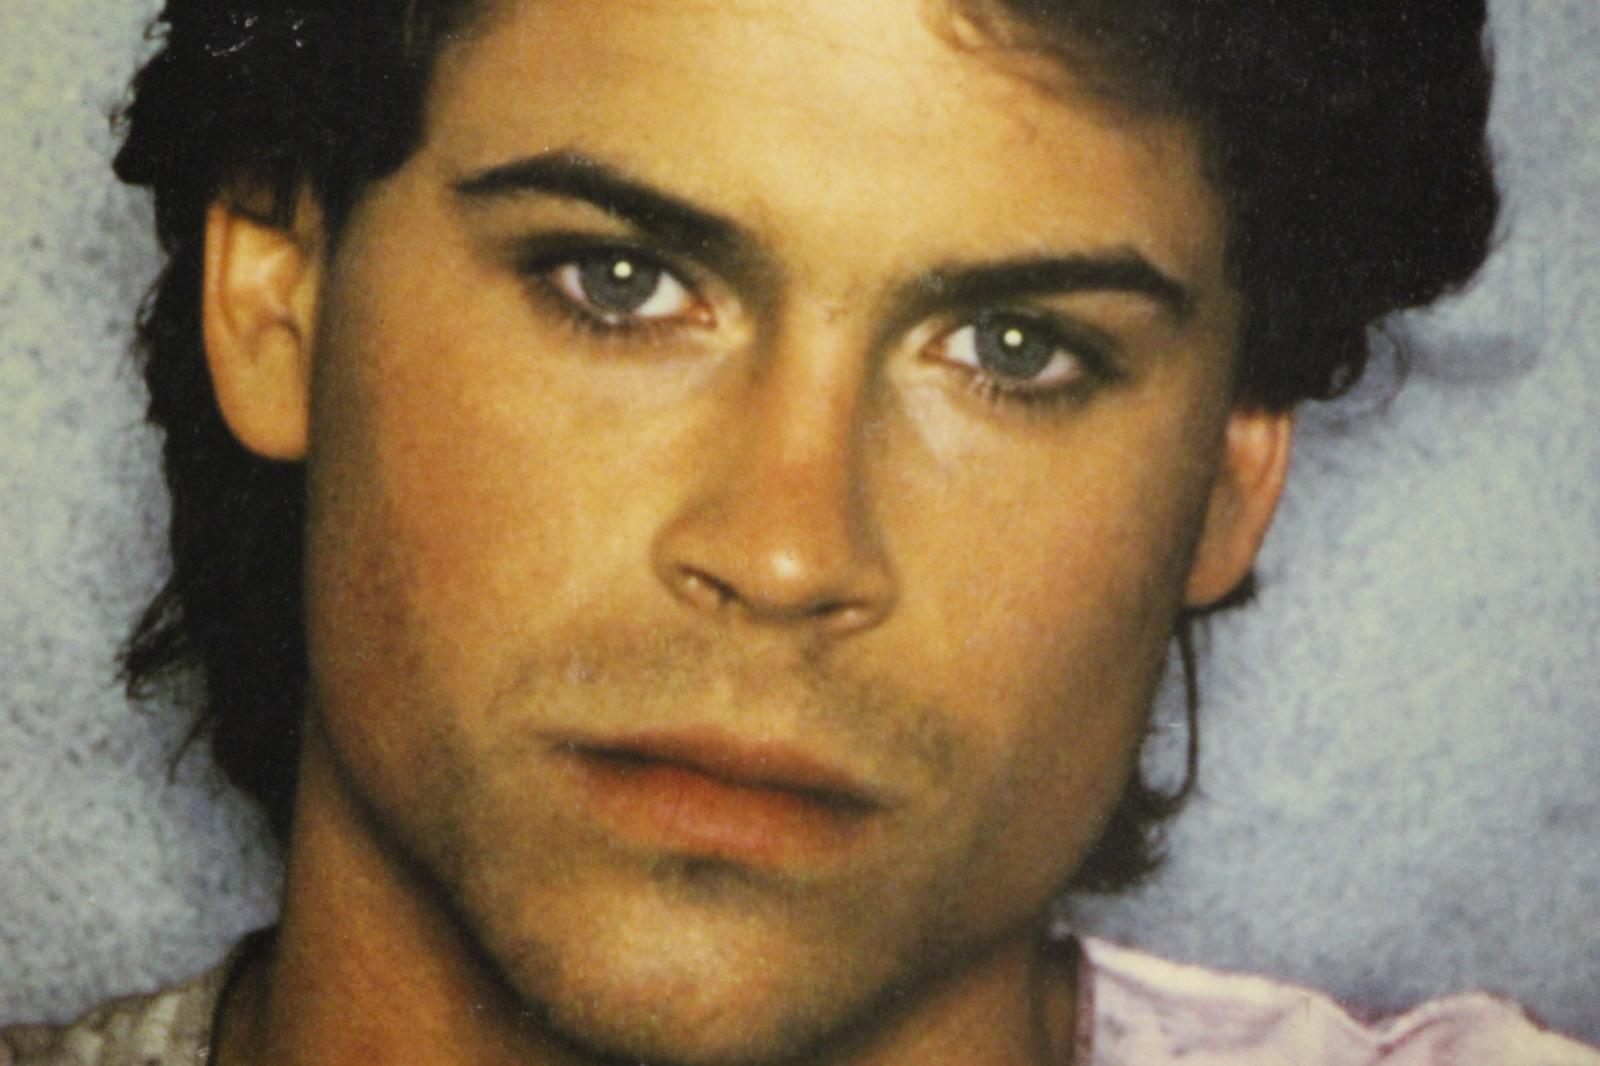 c1980s photo (on board) of heartthrob Rob Lowe from his Brat Pack stage

Image Sz: 19 3/8